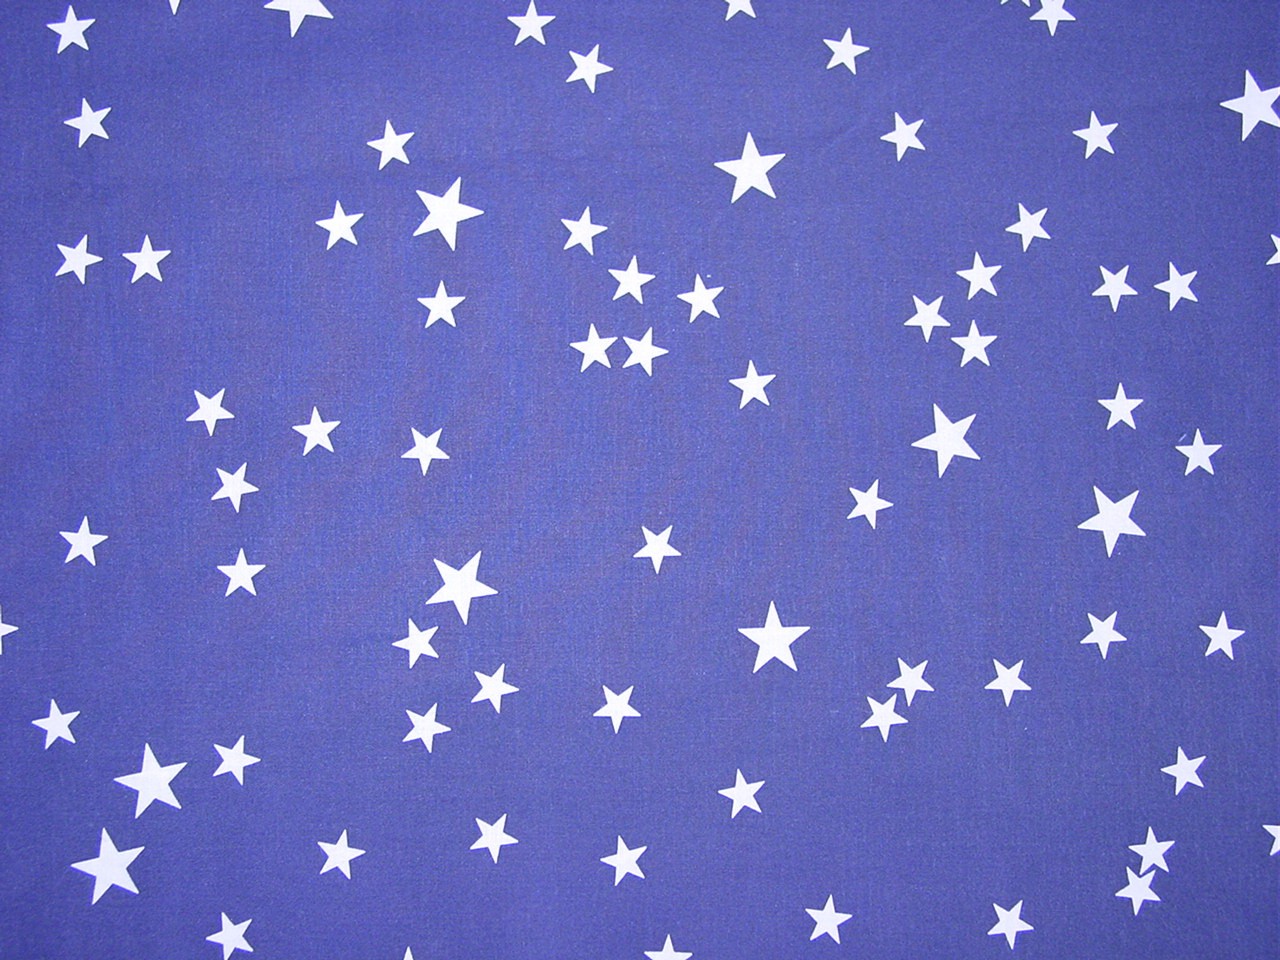 Navy Blue Fabric With Small Stars by nongbuadang on Etsy